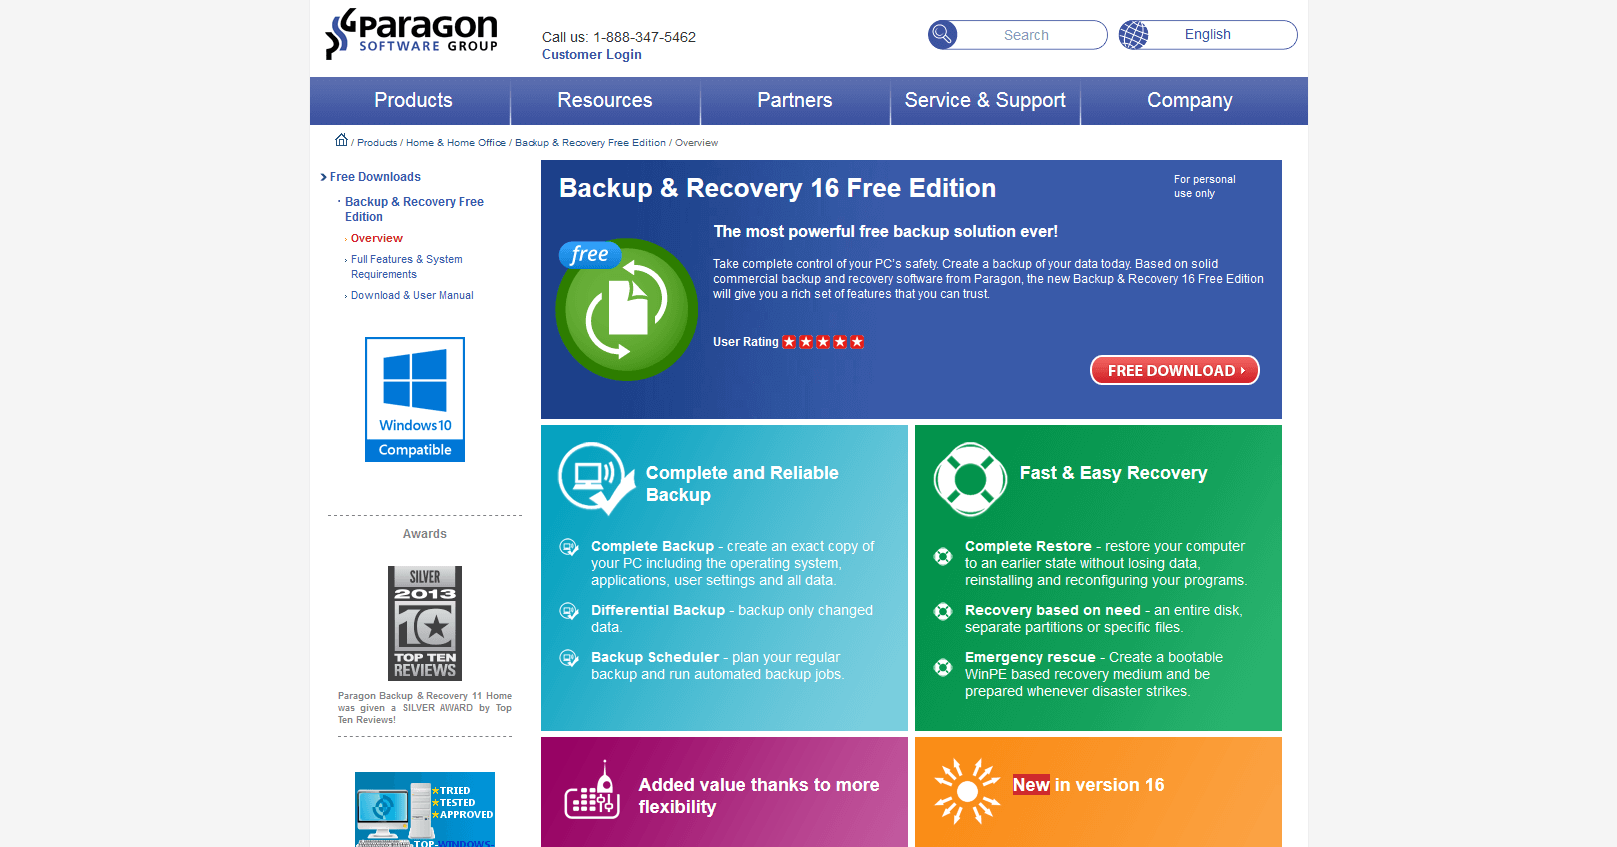 Paragon Backup & Recovery 16 Free